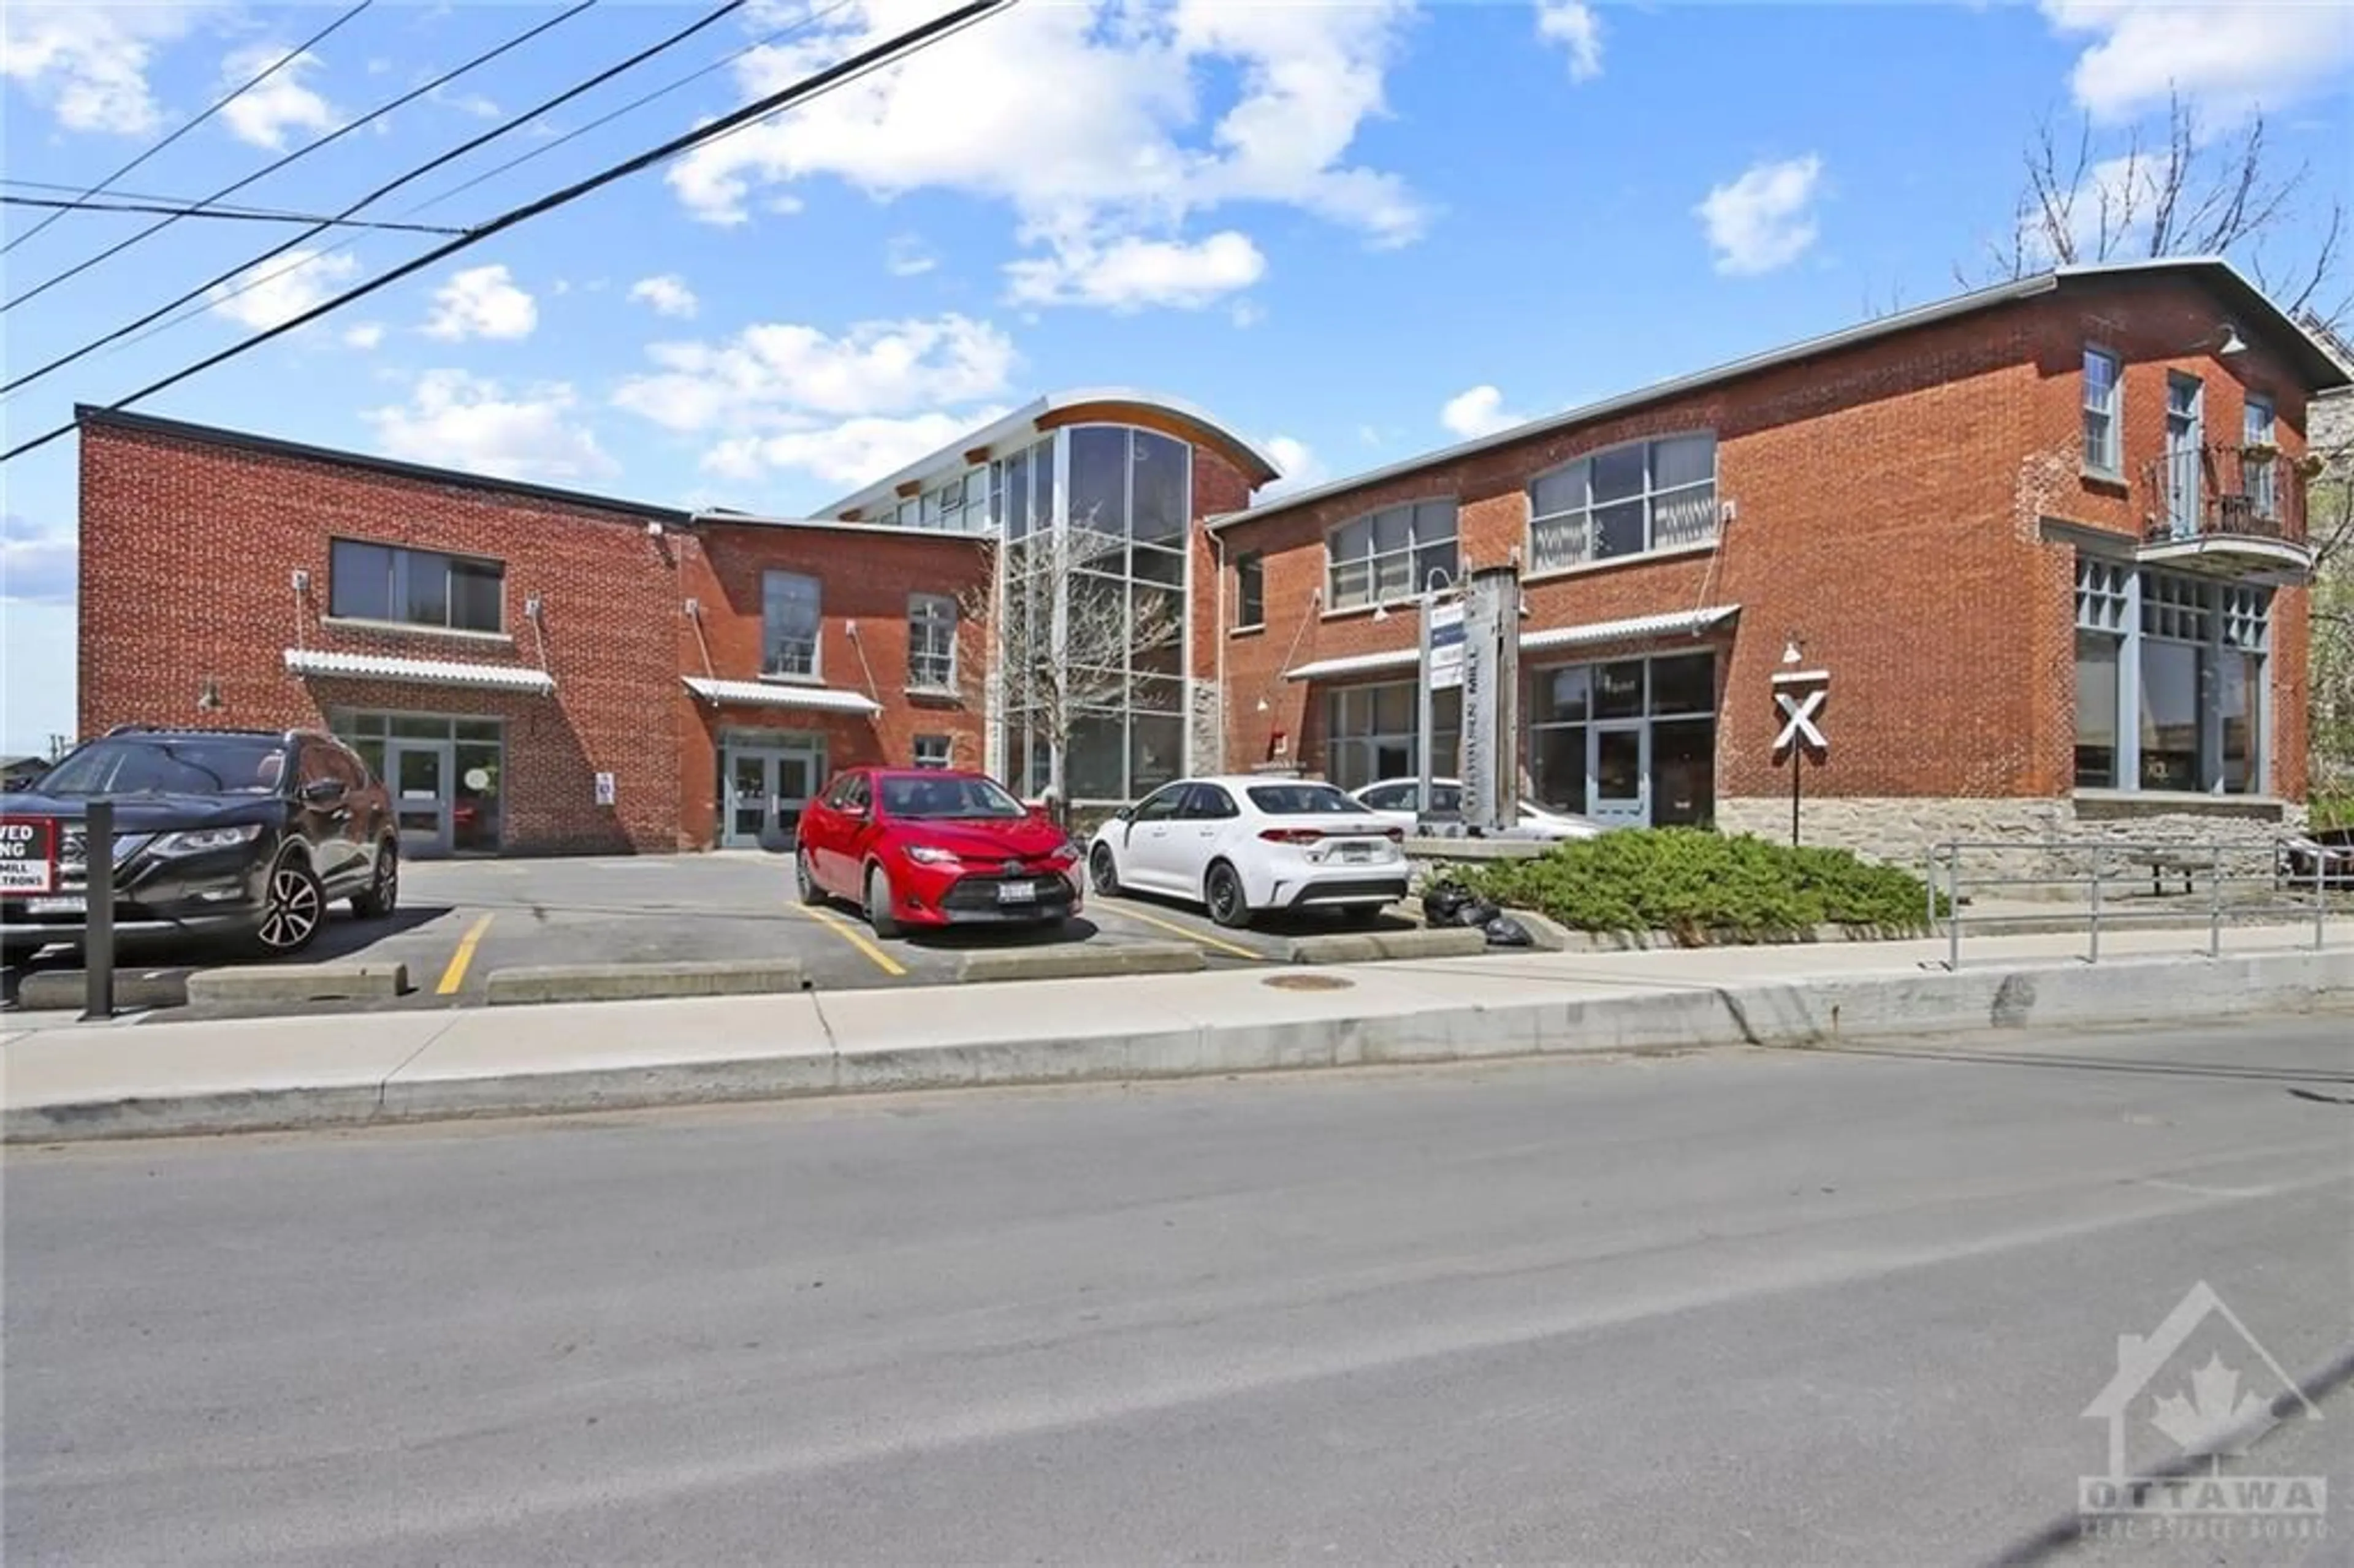 Outside view for 83 LITTLE BRIDGE St #212, Almonte Ontario K0A 1A0